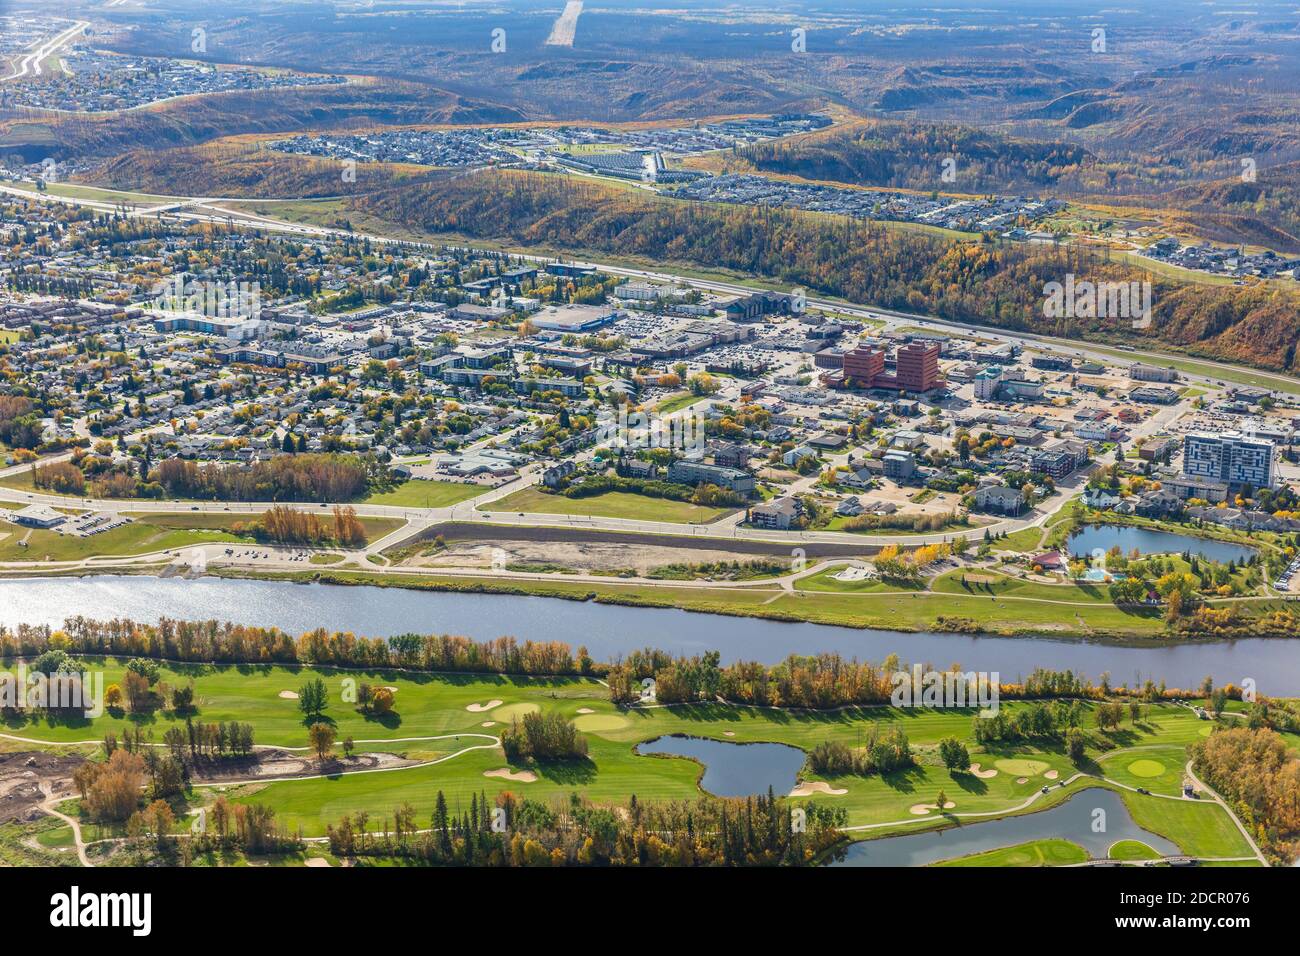 Aerial photo of downtown Fort McMurray, Alberta Canada with Miskanaw Golf Course in the foreground. Stock Photo